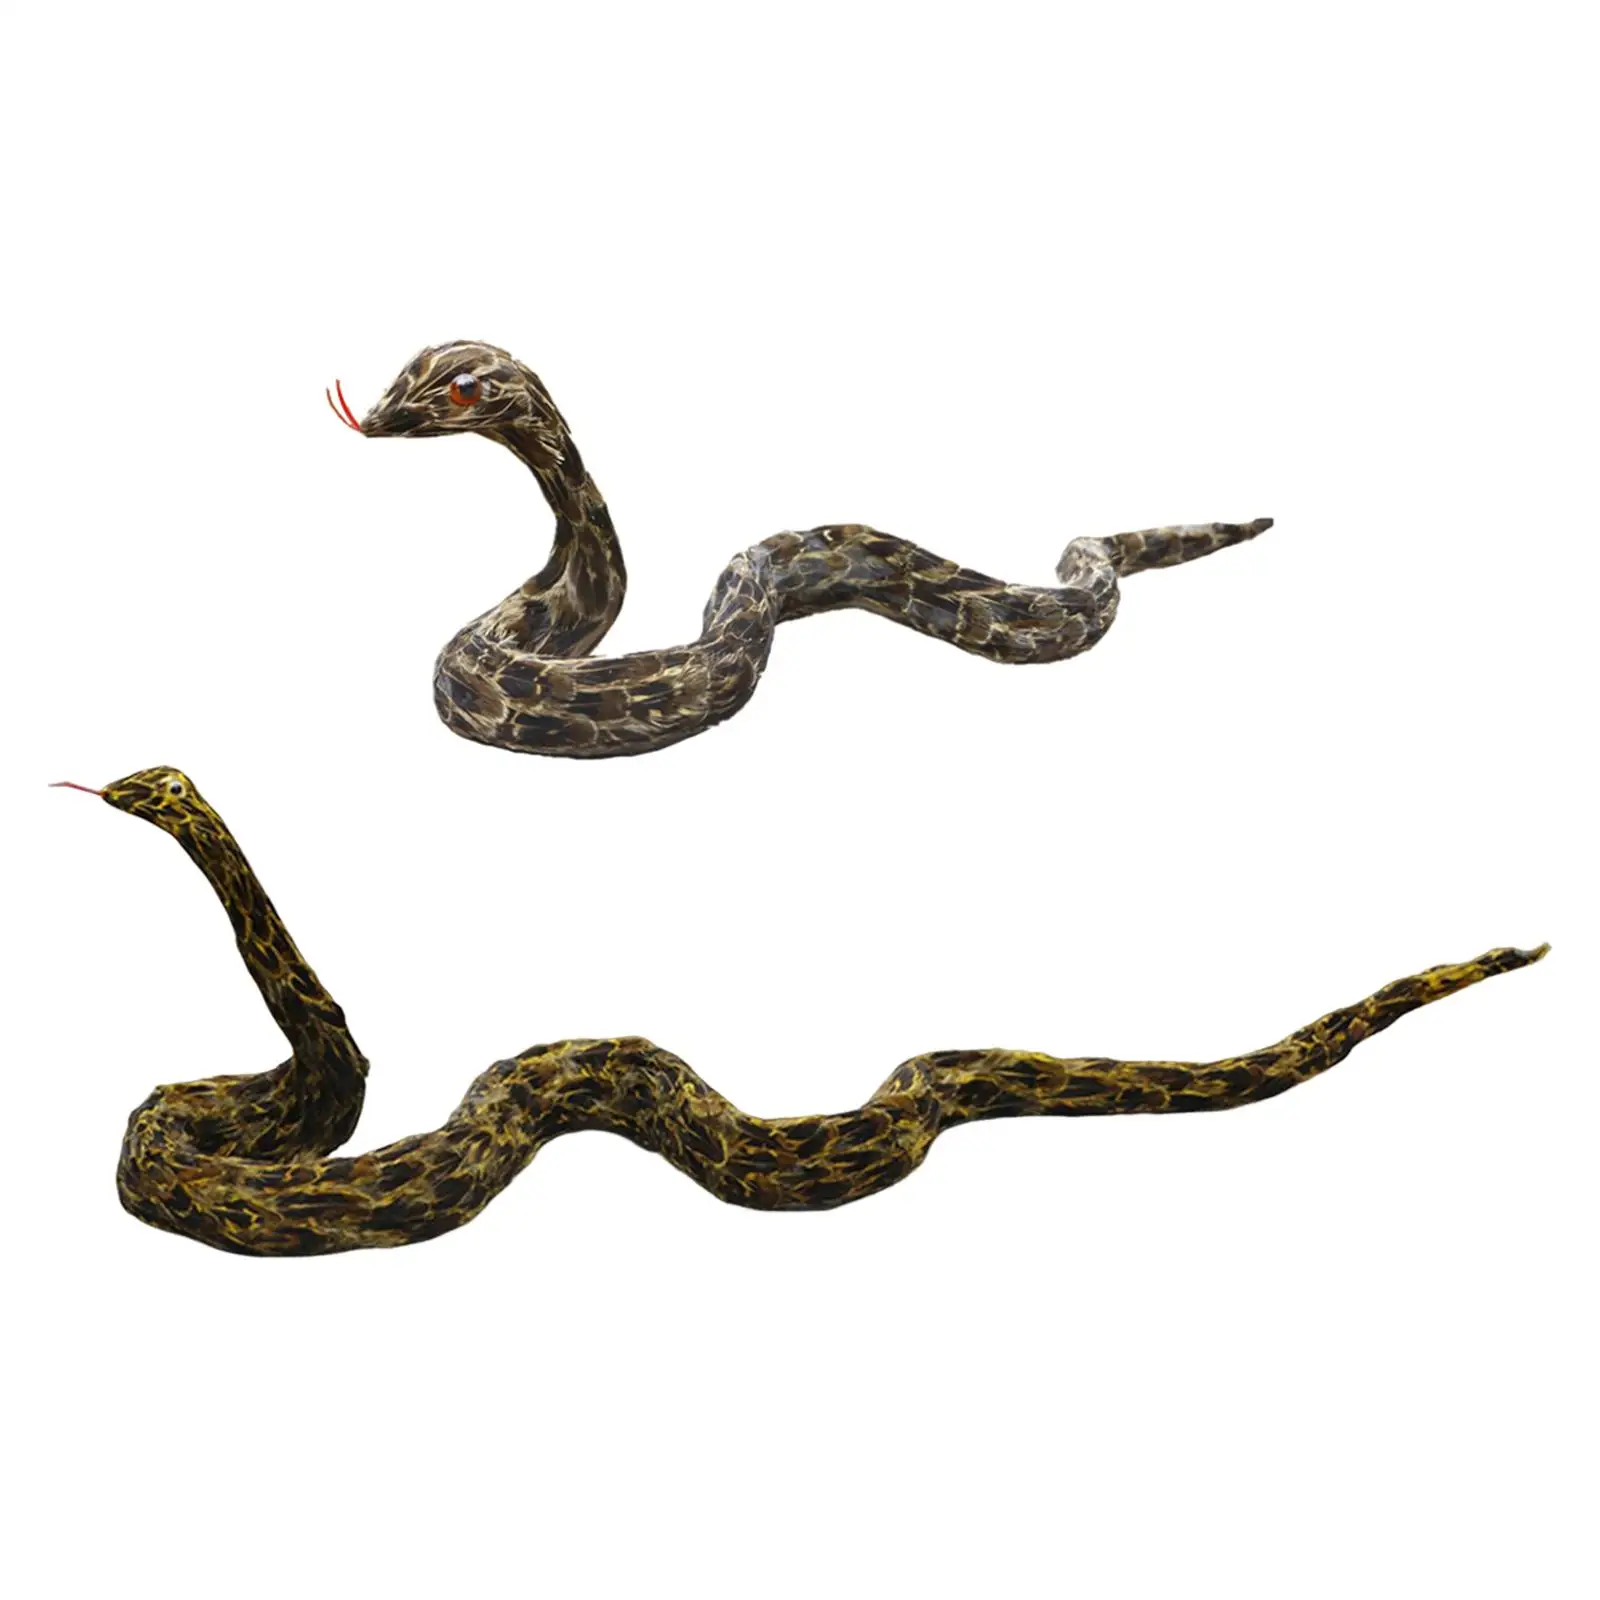 High Simulation Snake Model Toy Party Scary Creepy Snake Toy Tabletop Decors